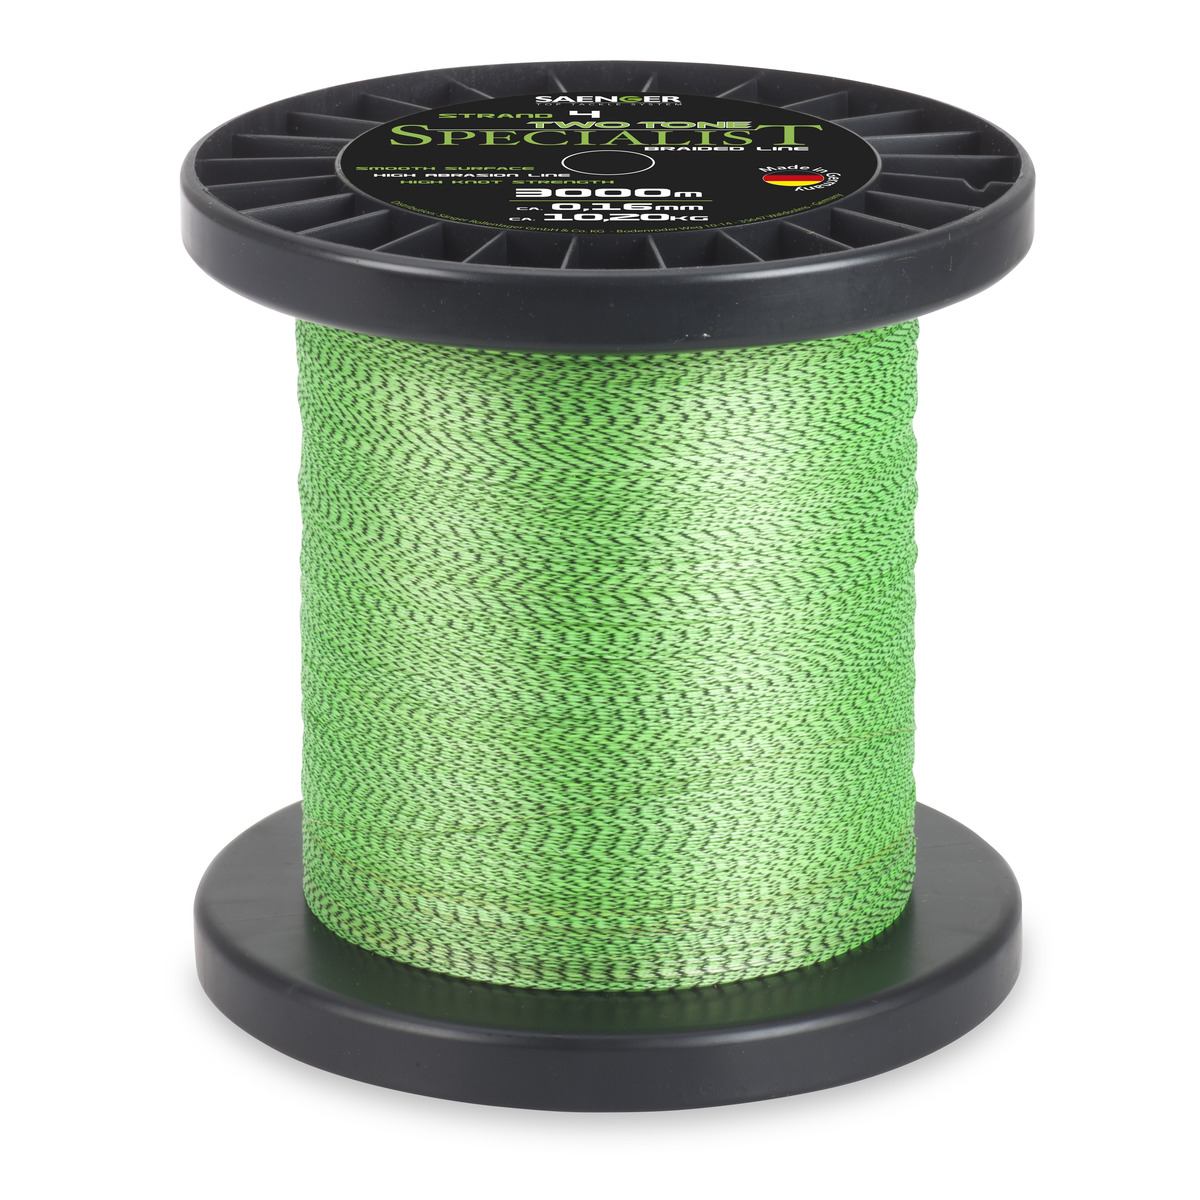 Saenger Specialist Two Tone Fluo Braid - 0,18 mm - 12,4kg 3000 m